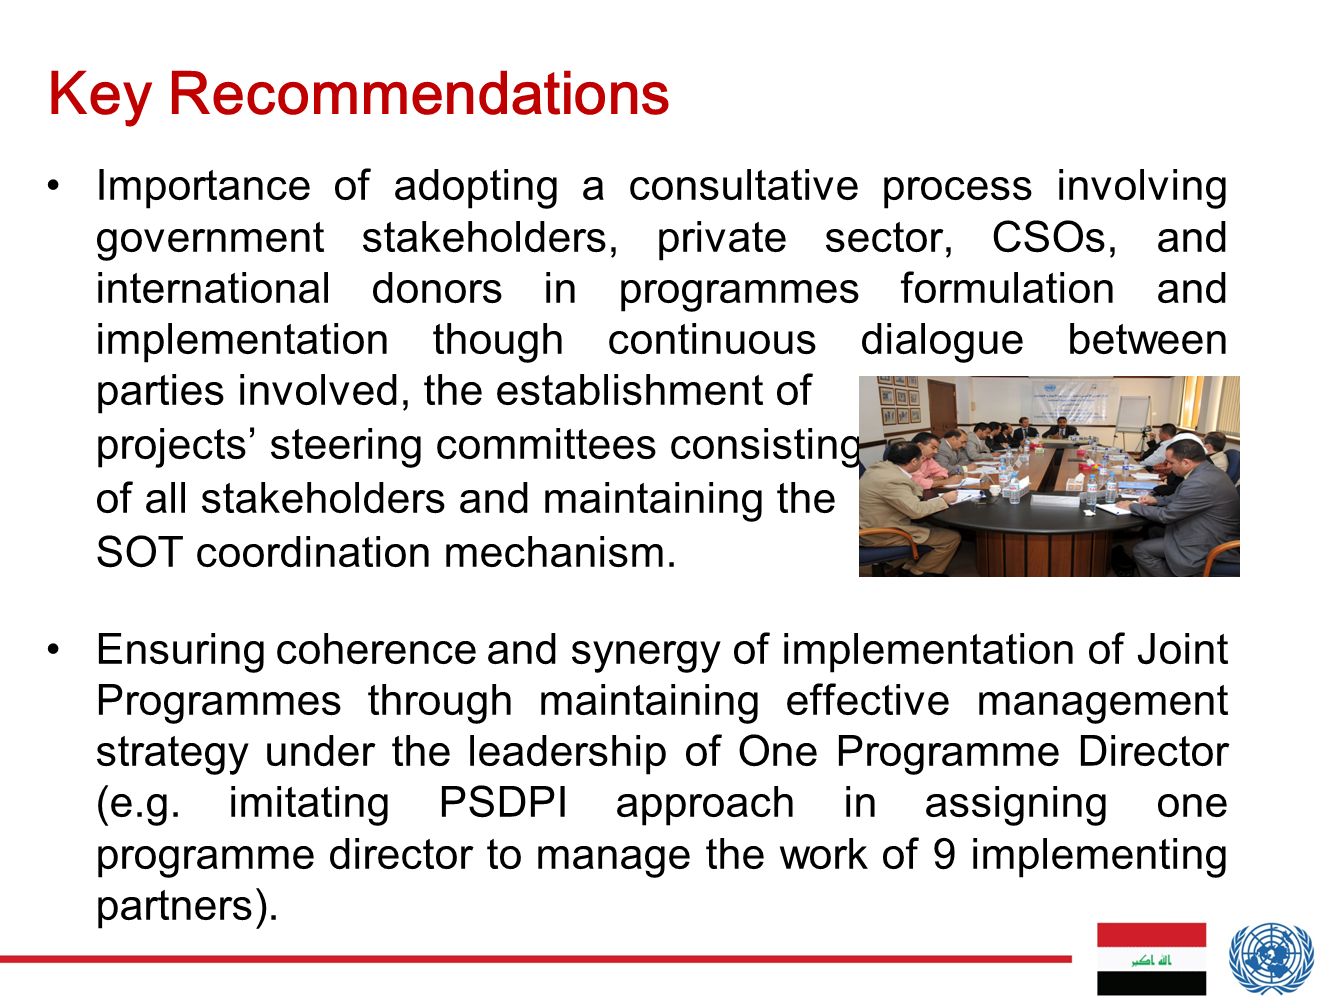 Key Recommendations Importance of adopting a consultative process involving government stakeholders, private sector, CSOs, and international donors in programmes formulation and implementation though continuous dialogue between parties involved, the establishment of projects’ steering committees consisting of all stakeholders and maintaining the SOT coordination mechanism.